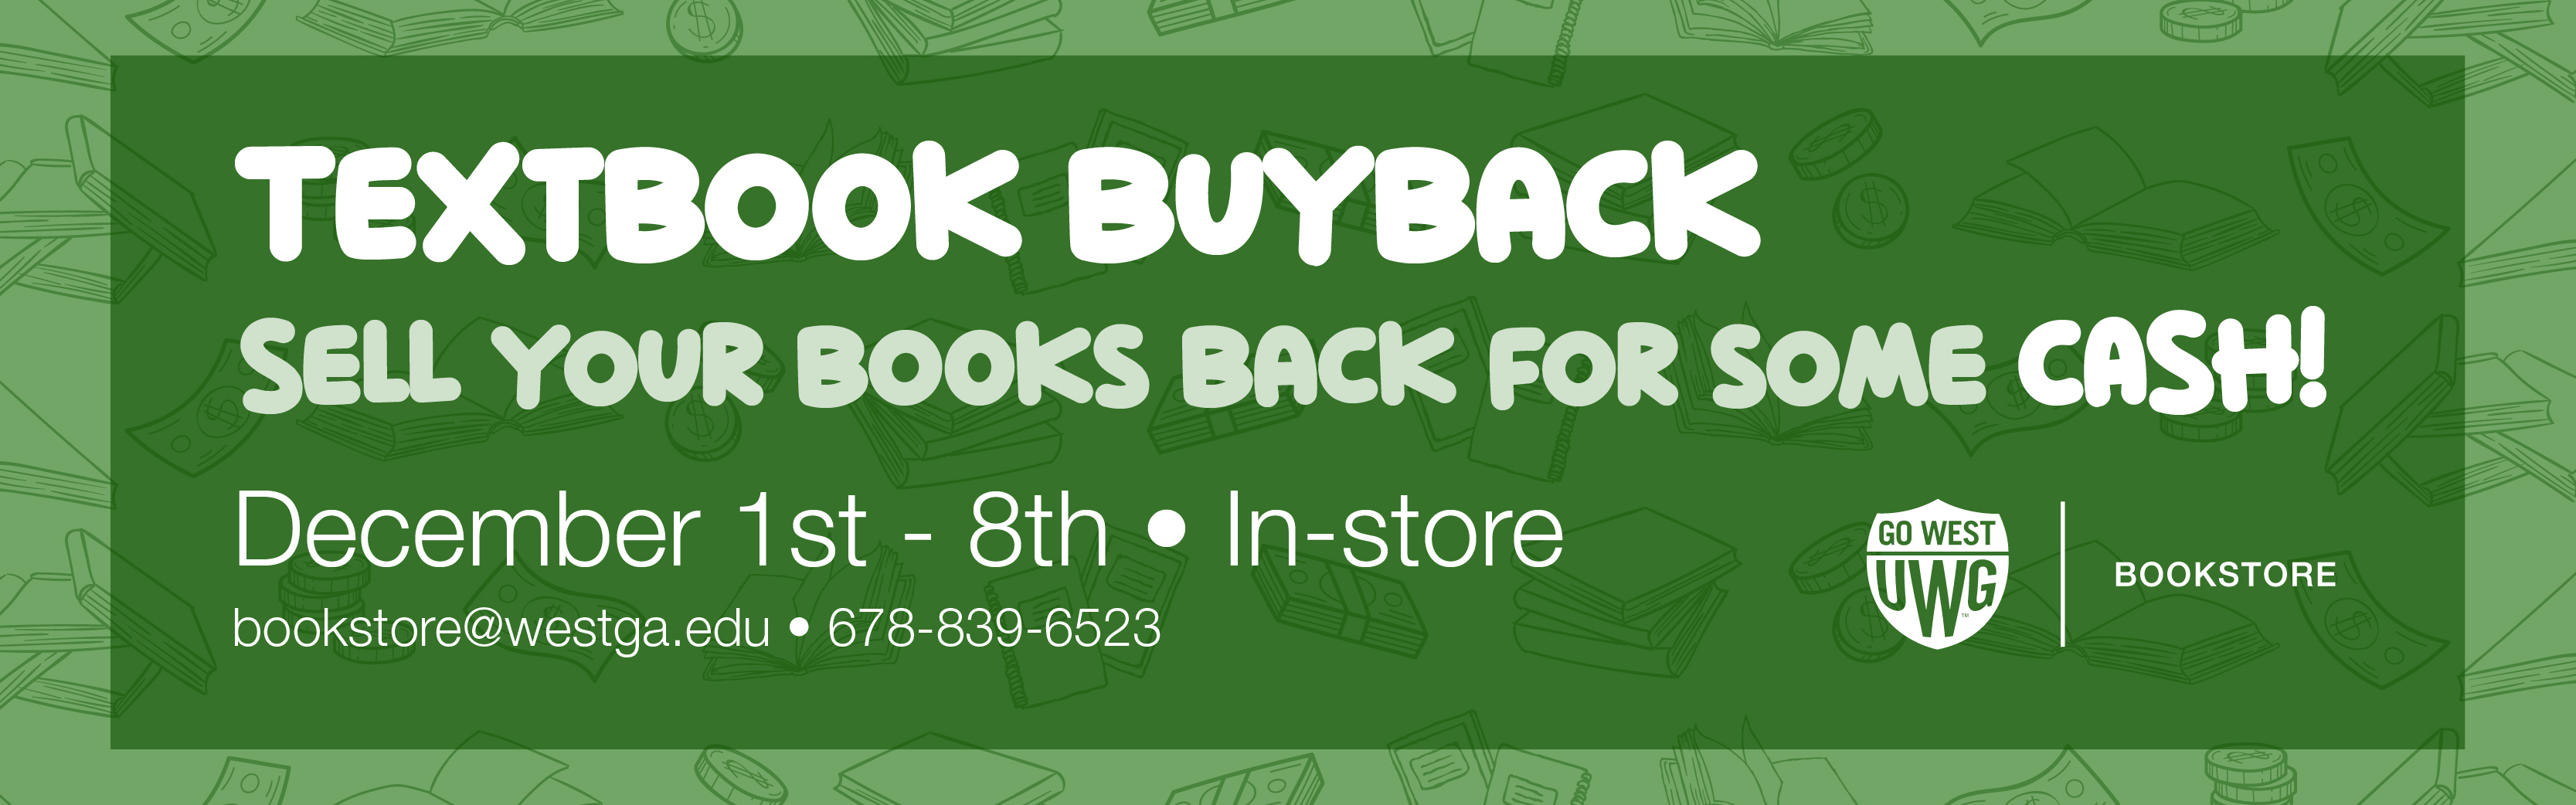 Textbook Buyback. Sell your books back for some cash! December 1st through 8th. In-store.